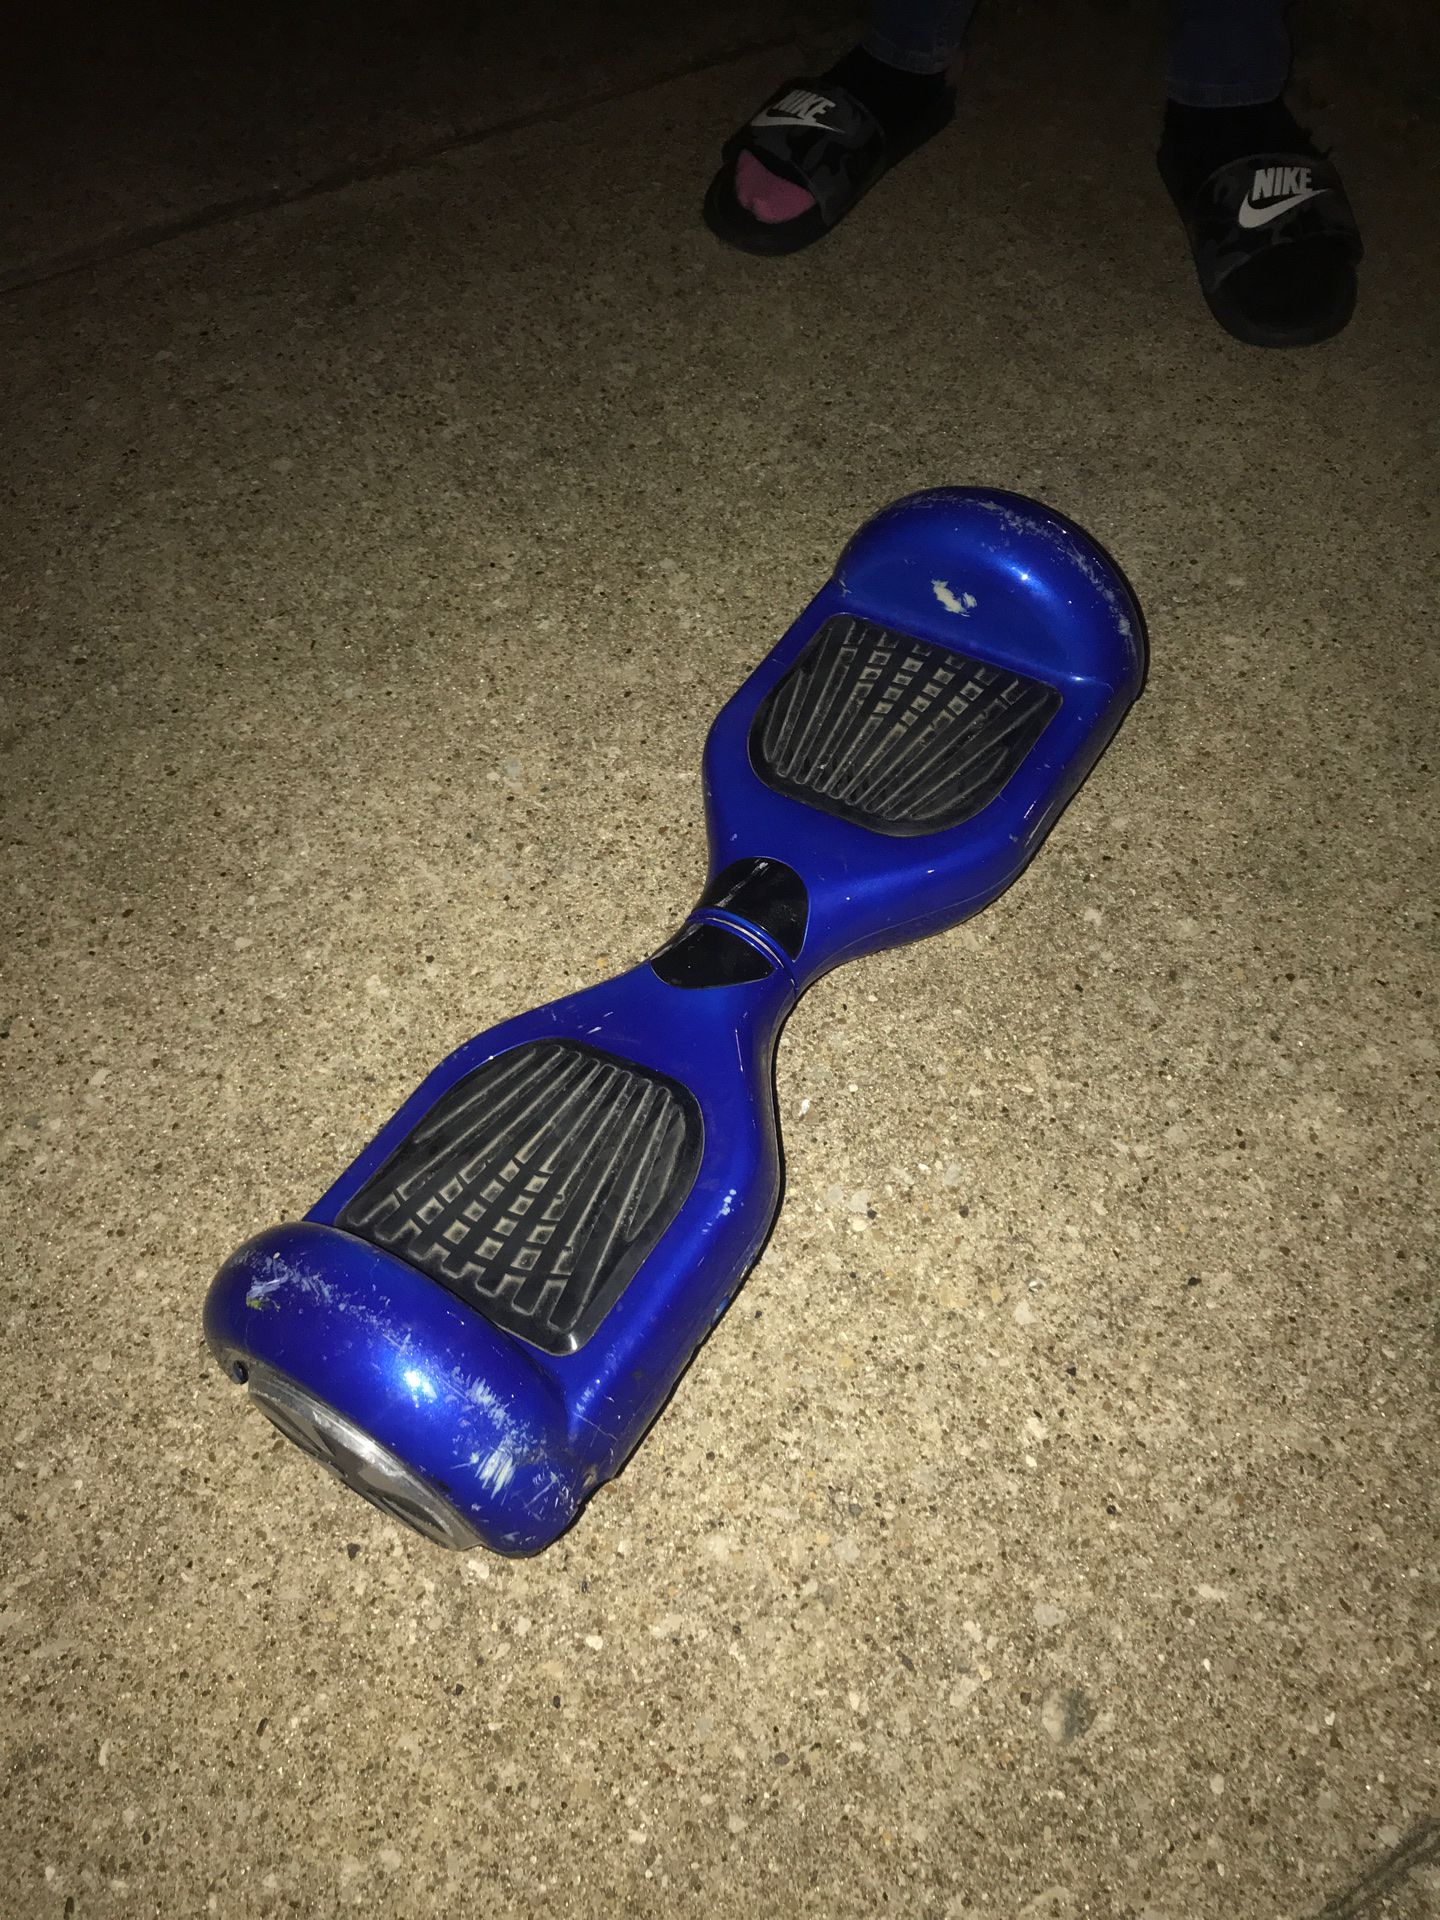 Hoverboard for sale missing charger